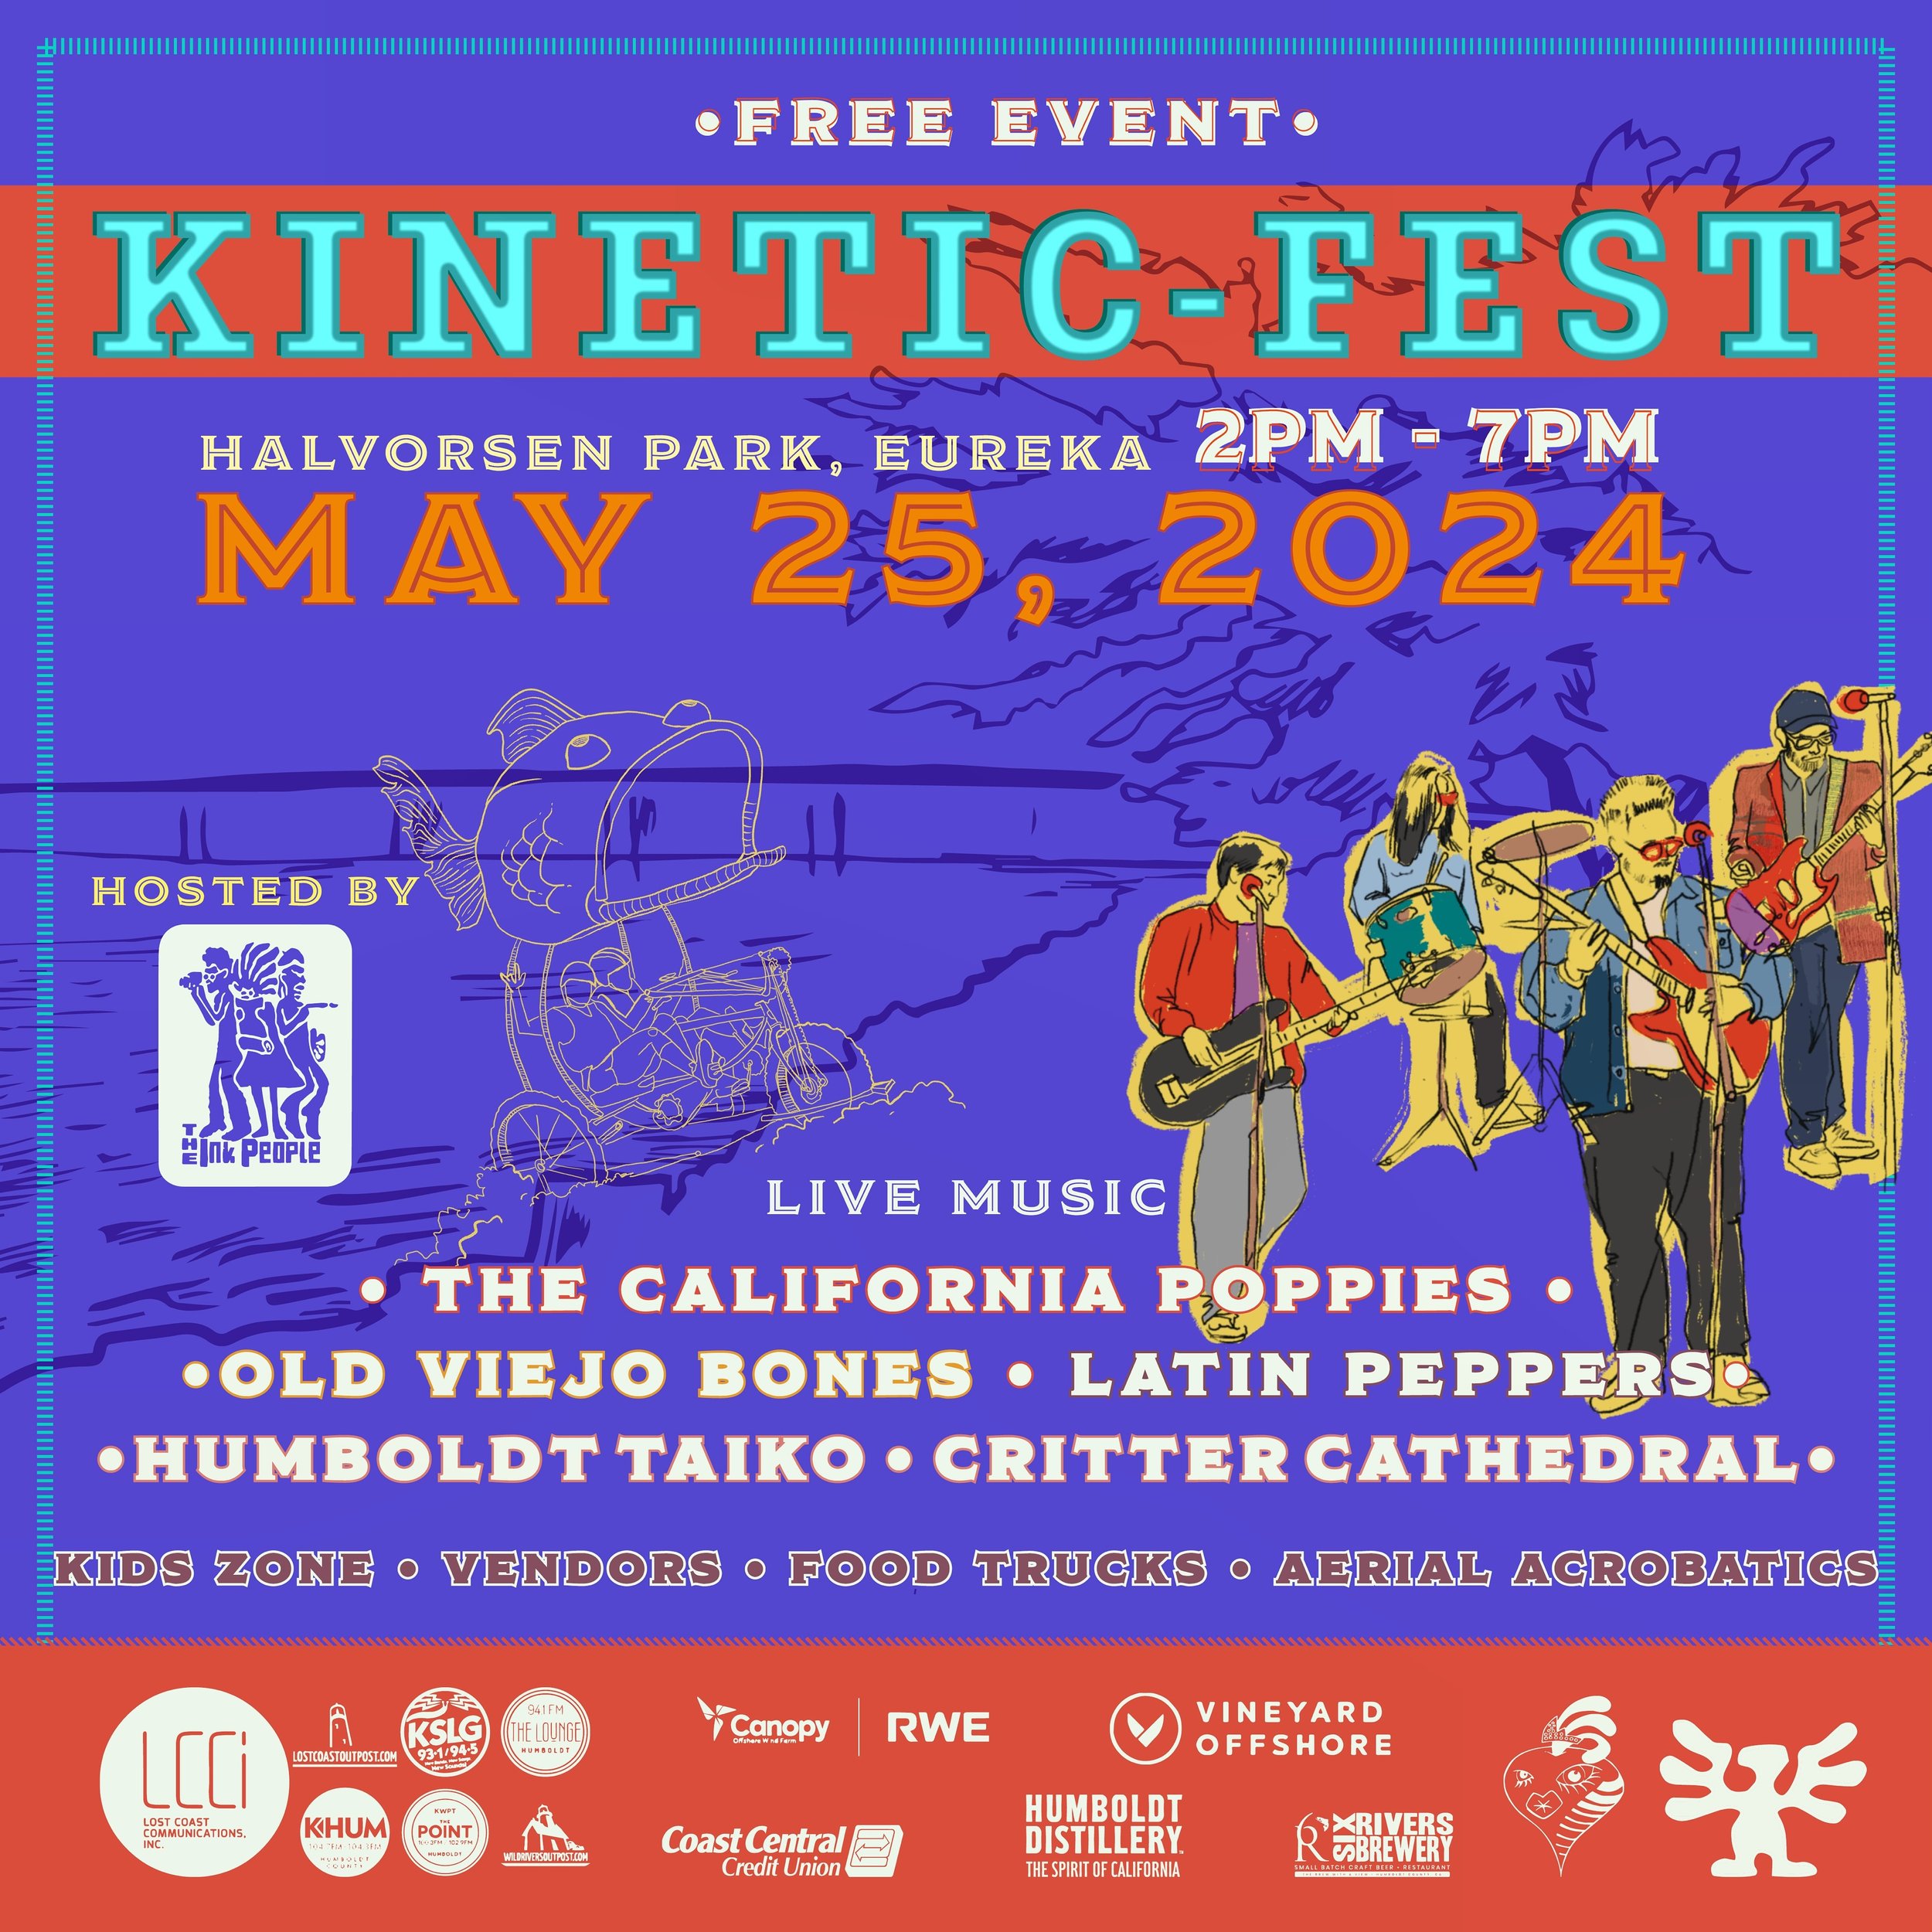 ✨ We are thrilled to announce we are hosting Kinetic-Fest this year! Join us for this free event on May 25 from 2pm - 7pm at Halvorsen Park in Eureka.

🕺🏽This family friendly festival will have live music, artisan vendors, tasty food trucks, captiv